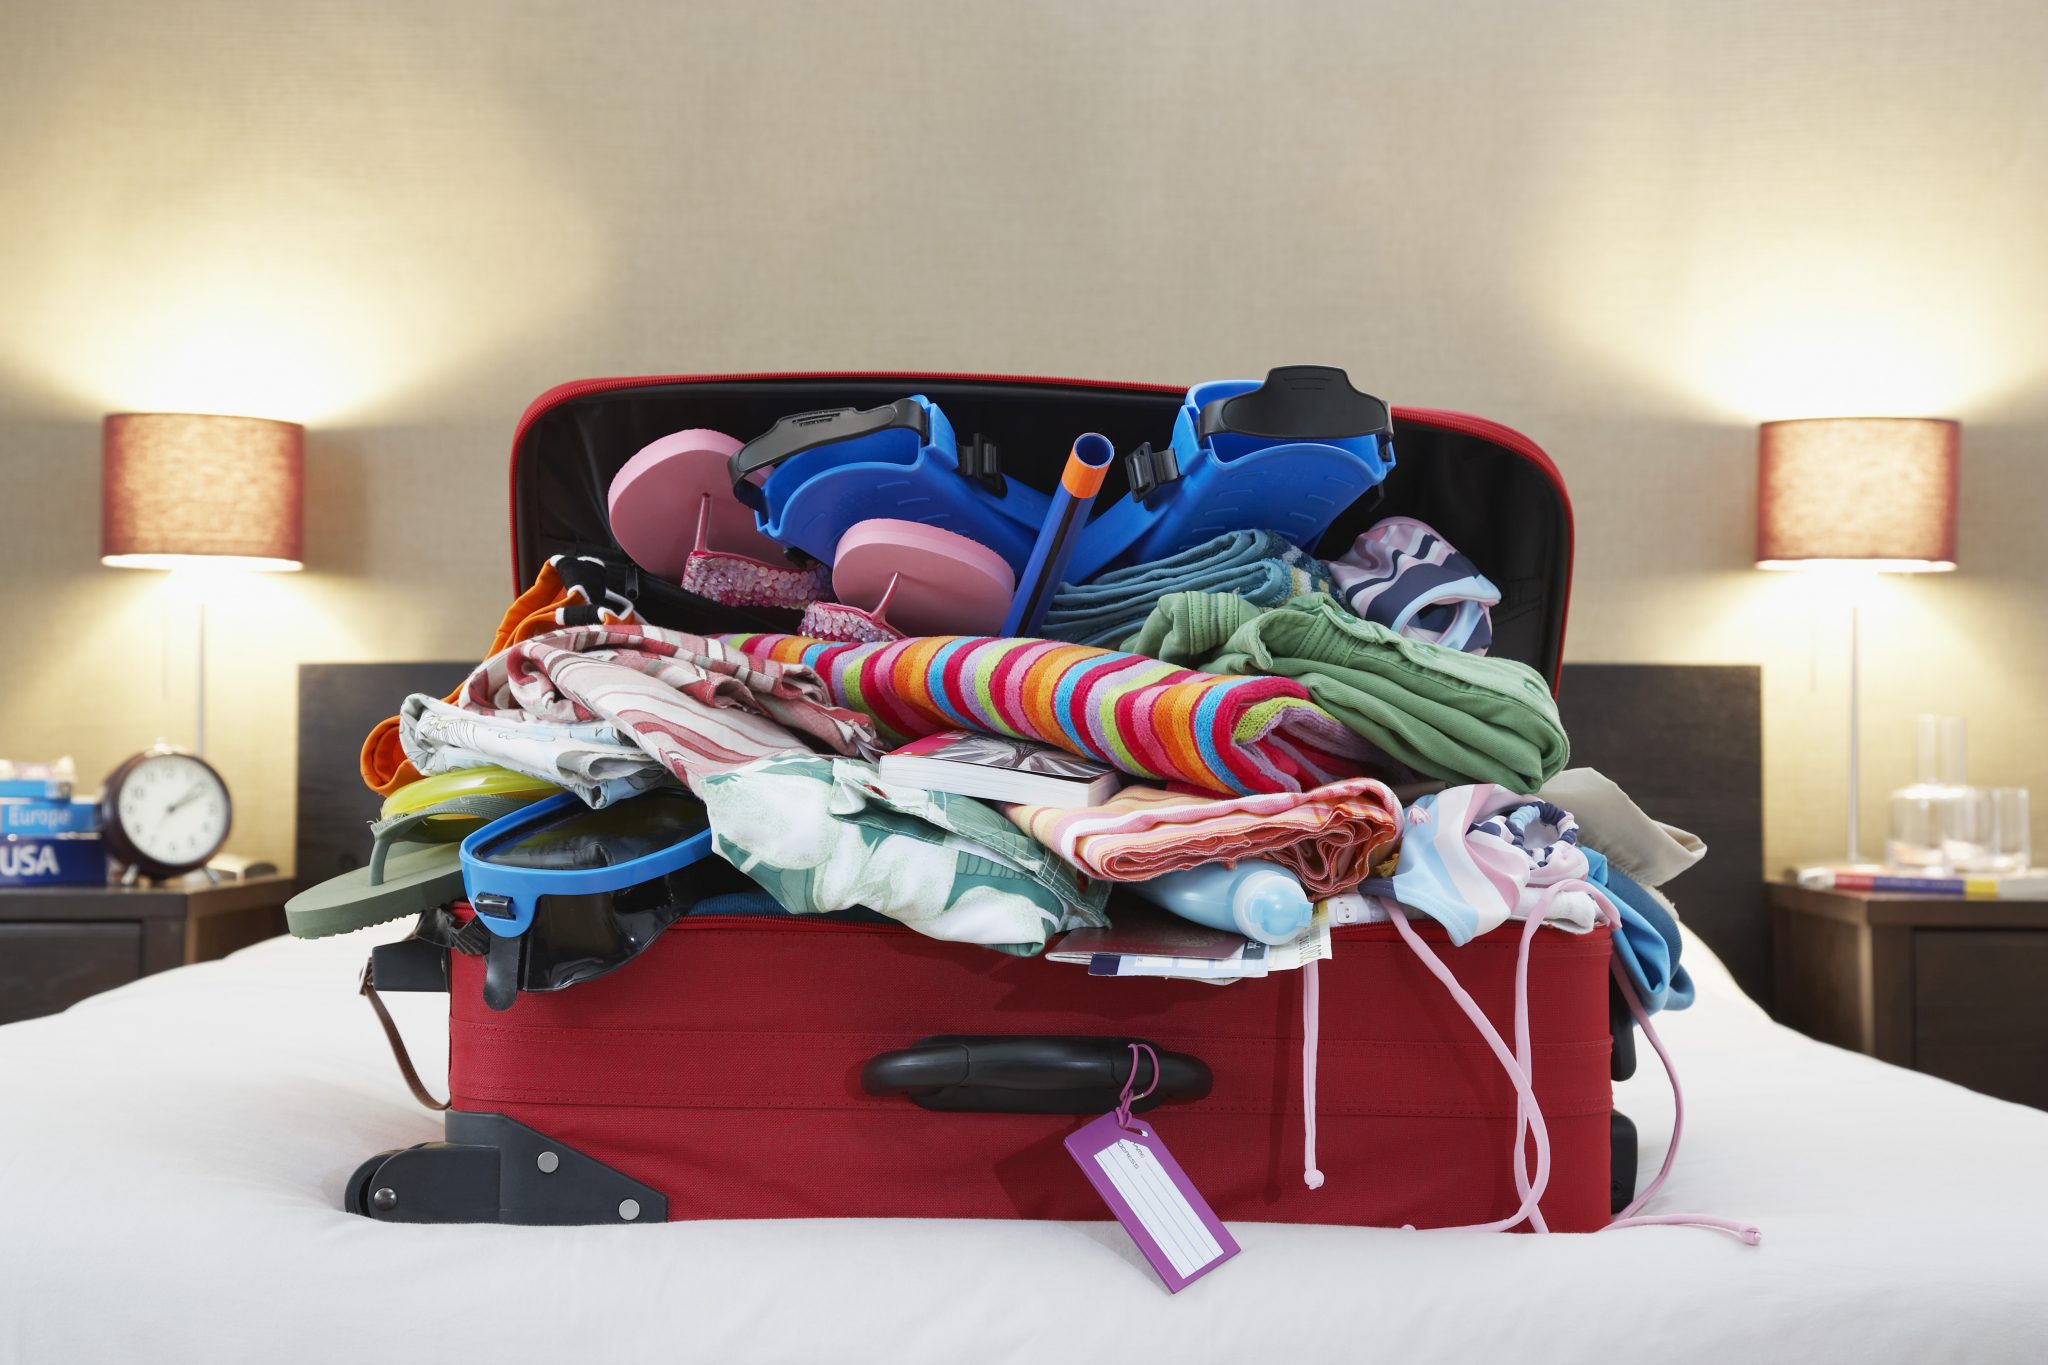 How To Pack for a Weekend Getaway